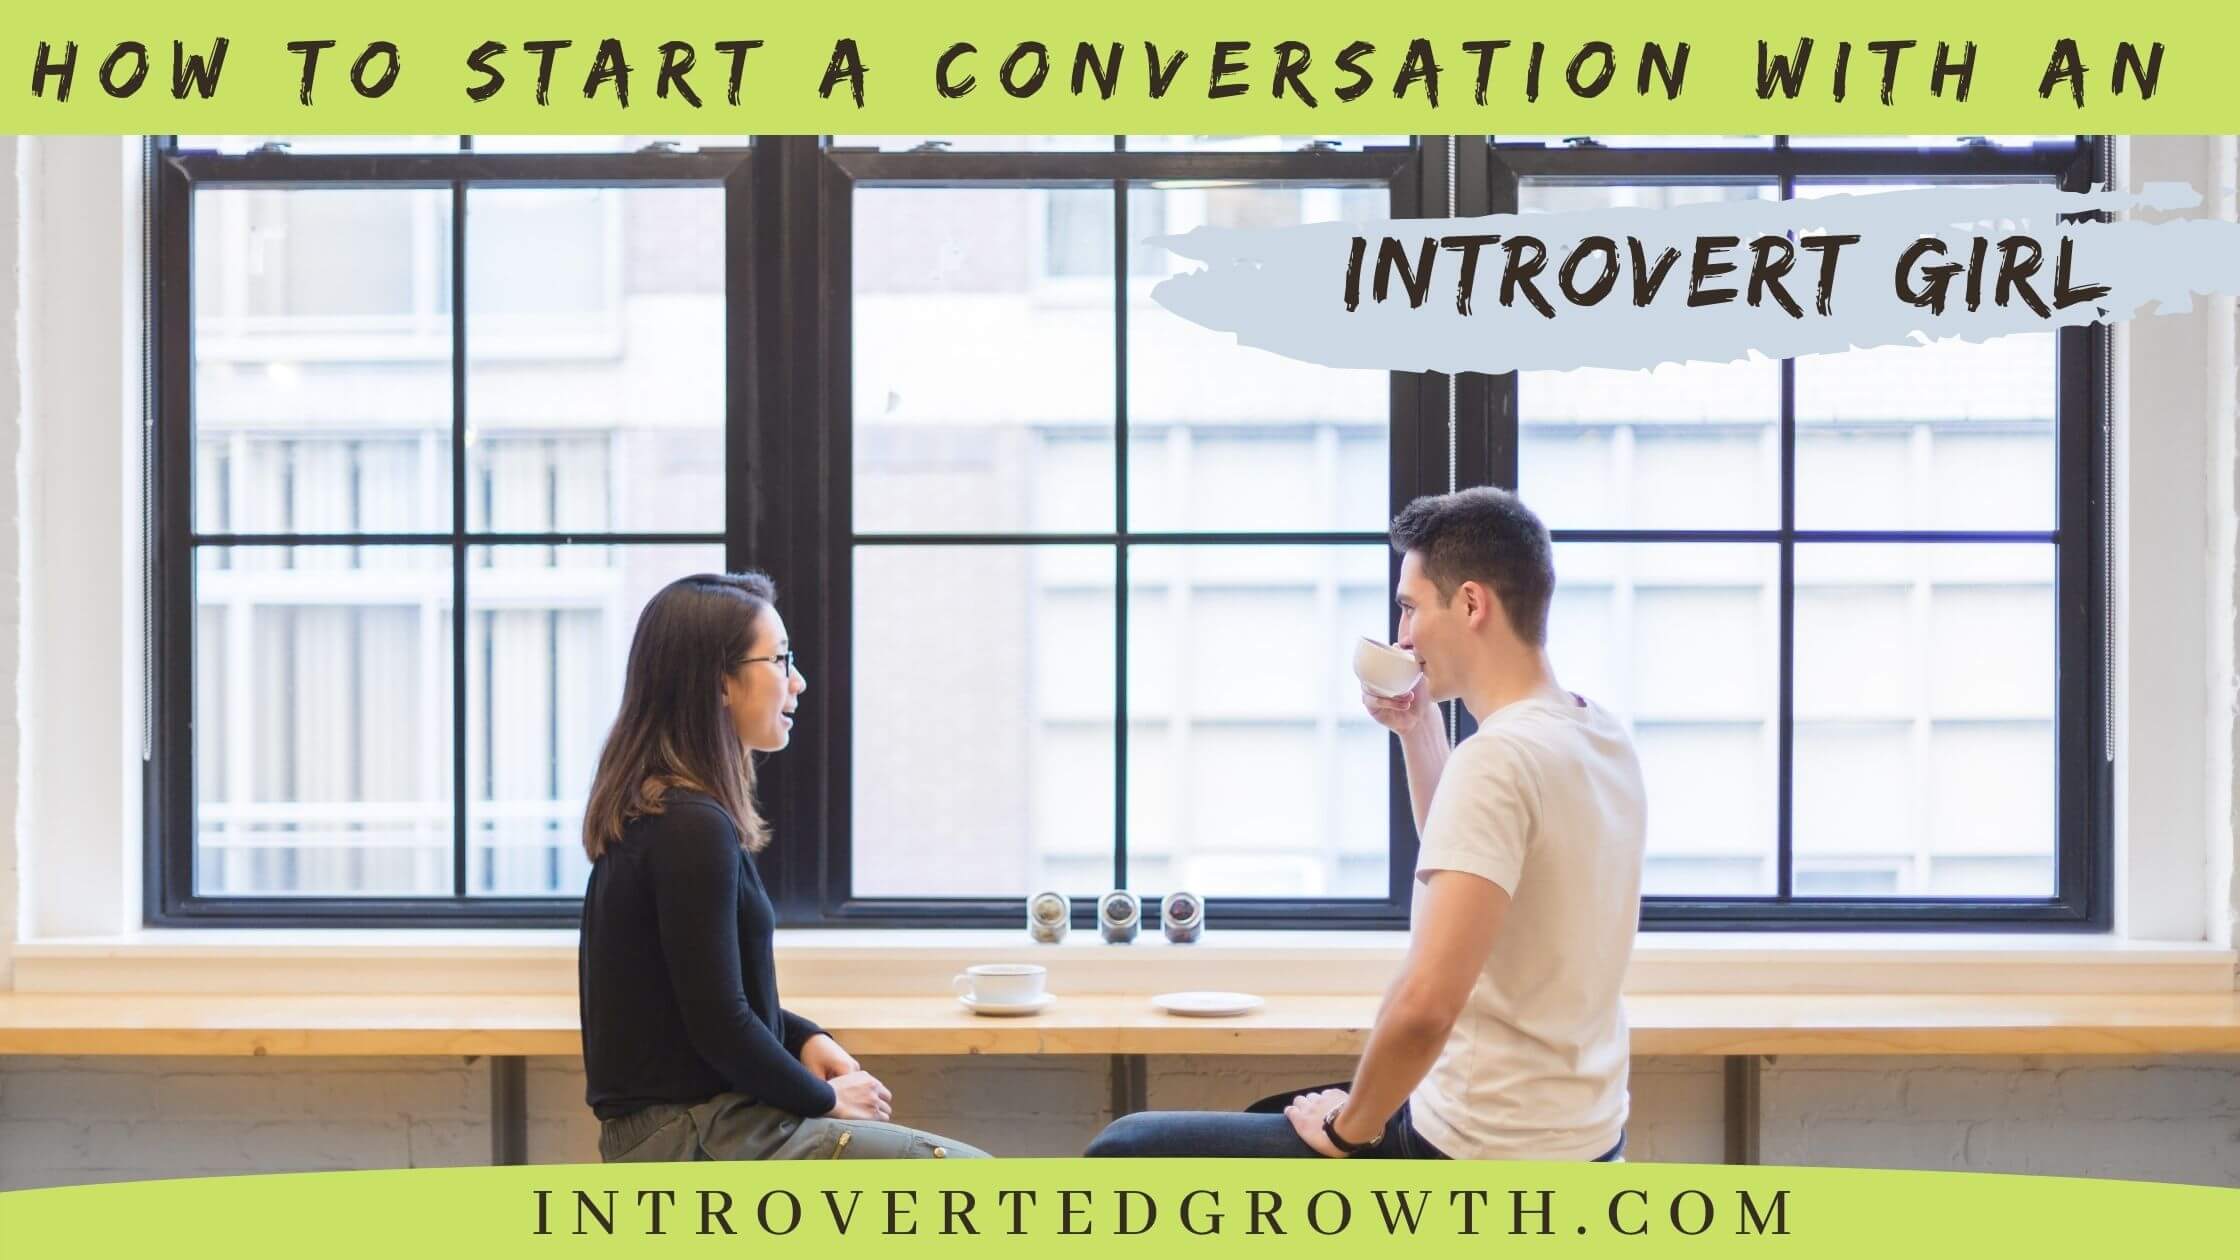 Introverted girl an dating Dating an